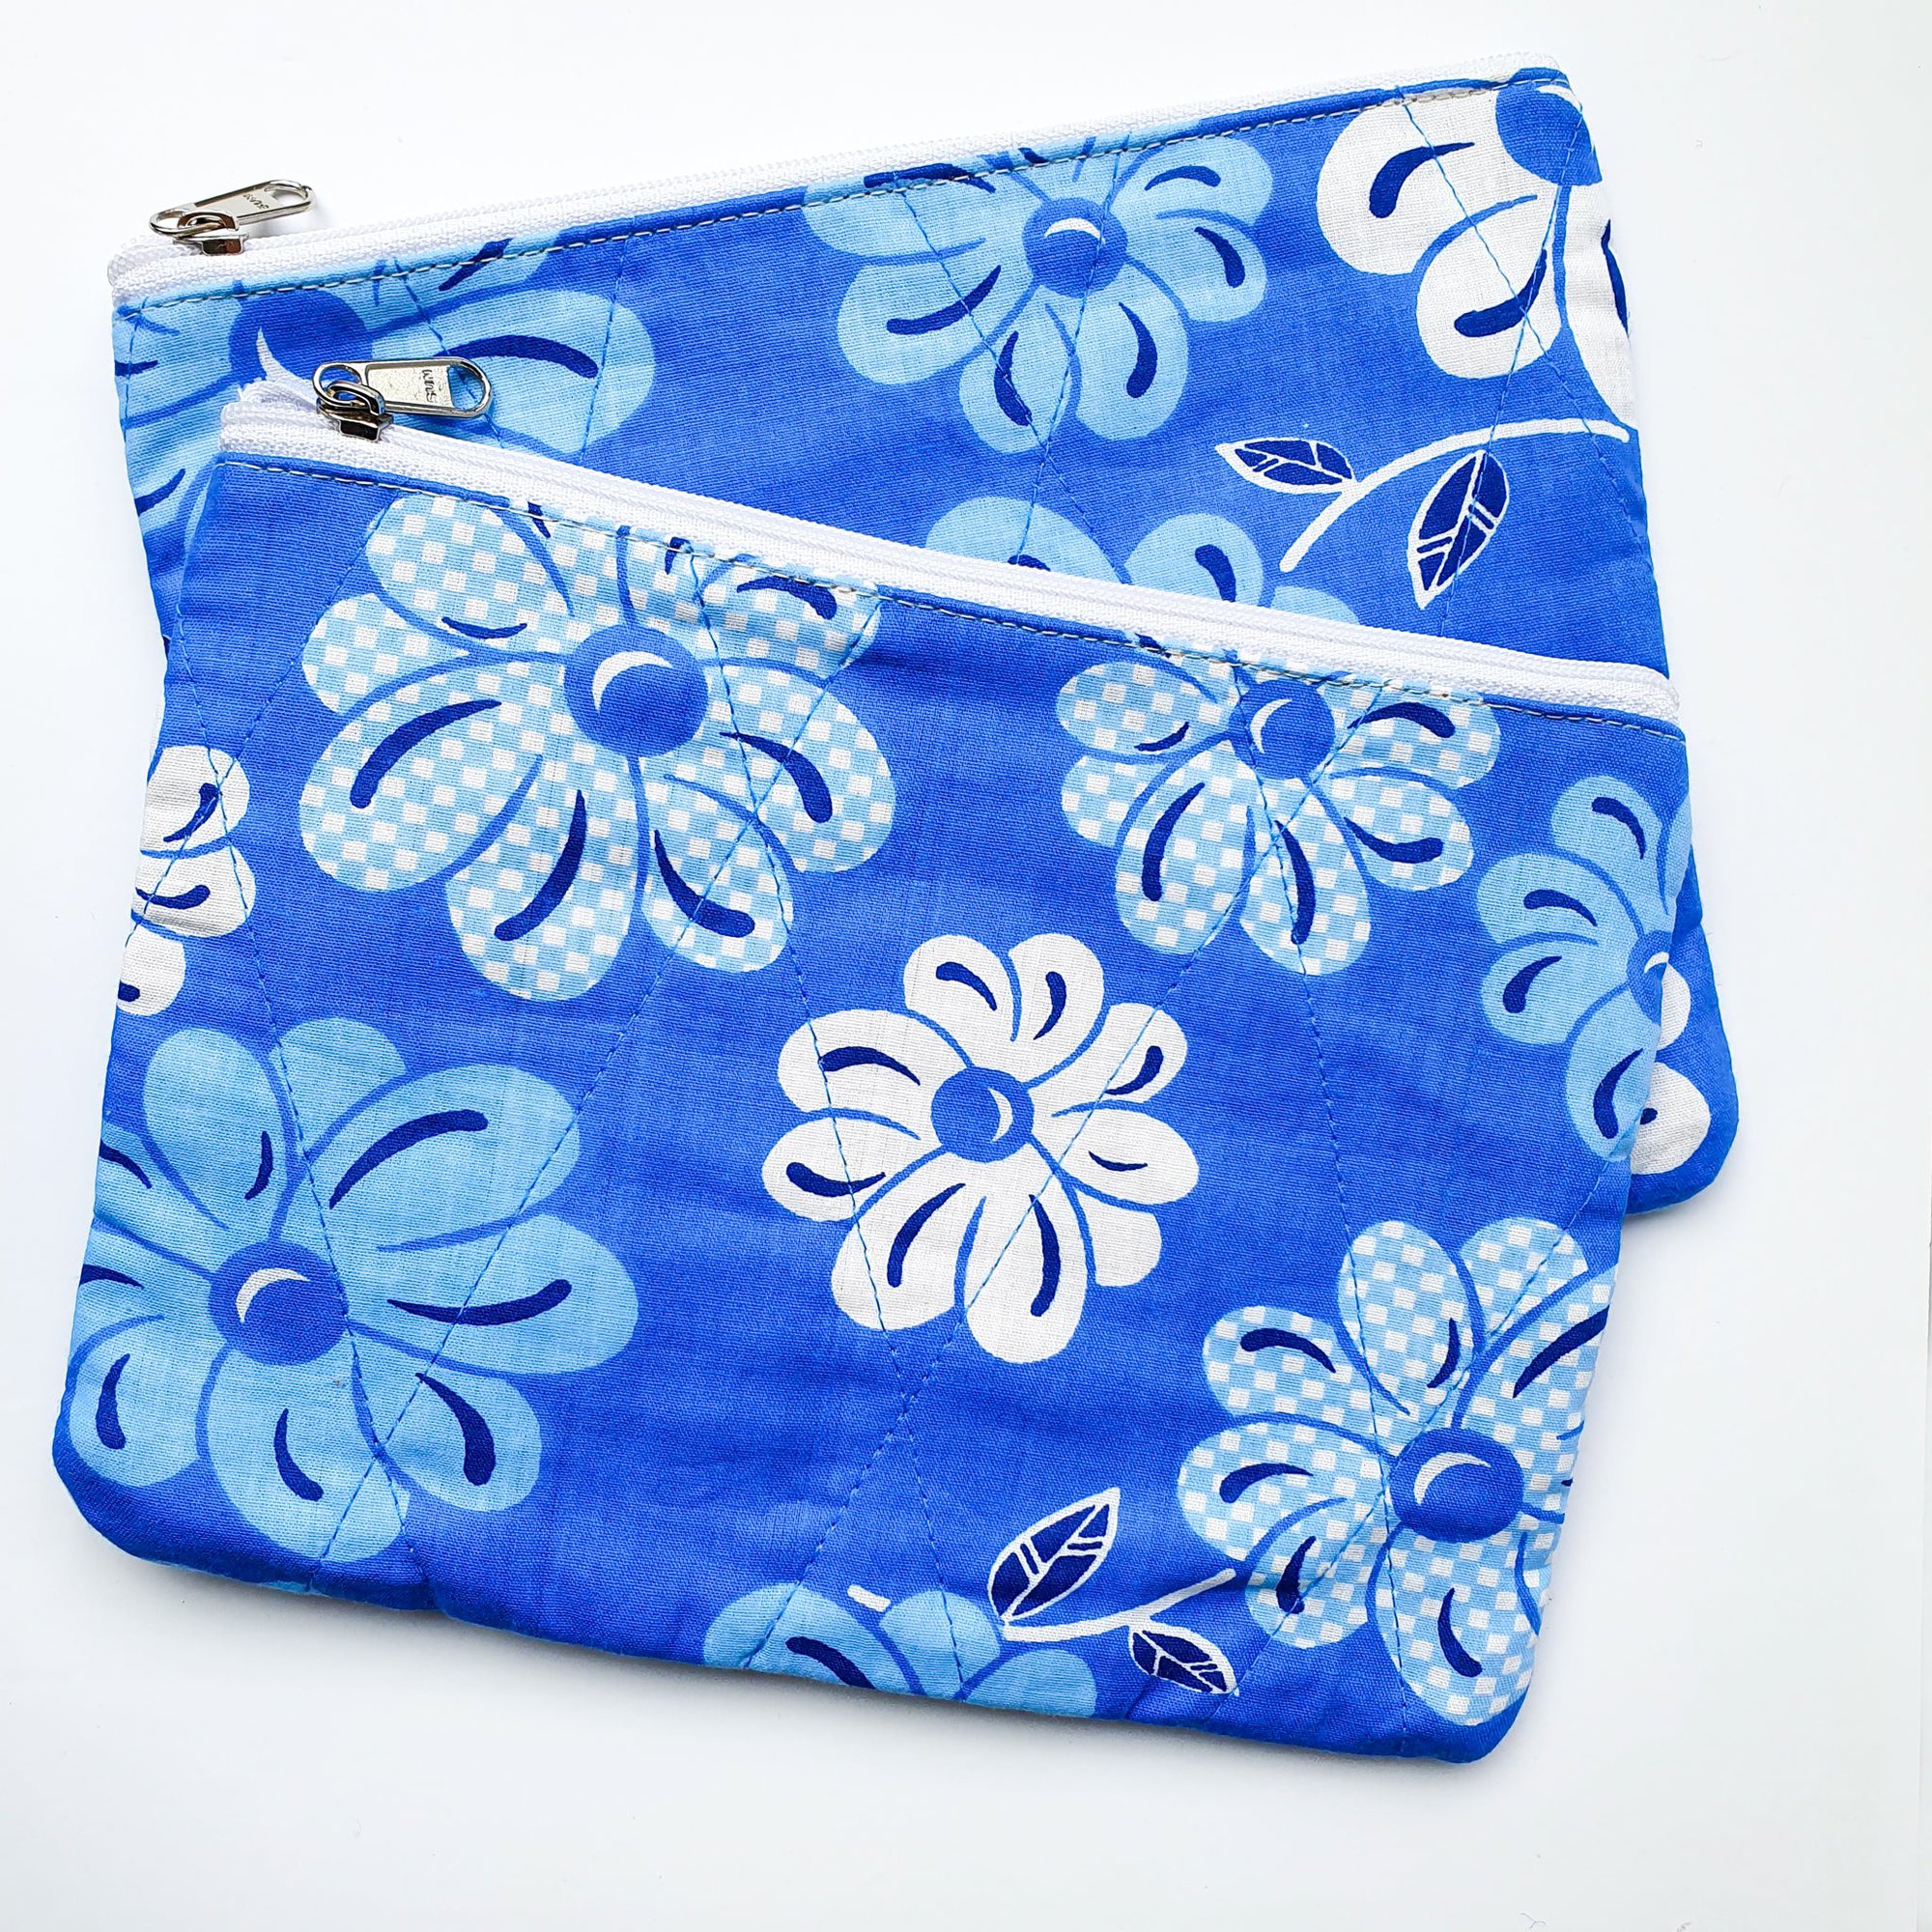 Flat Upcycled Sari Pouch, Large Wallet, Blue Floral Design